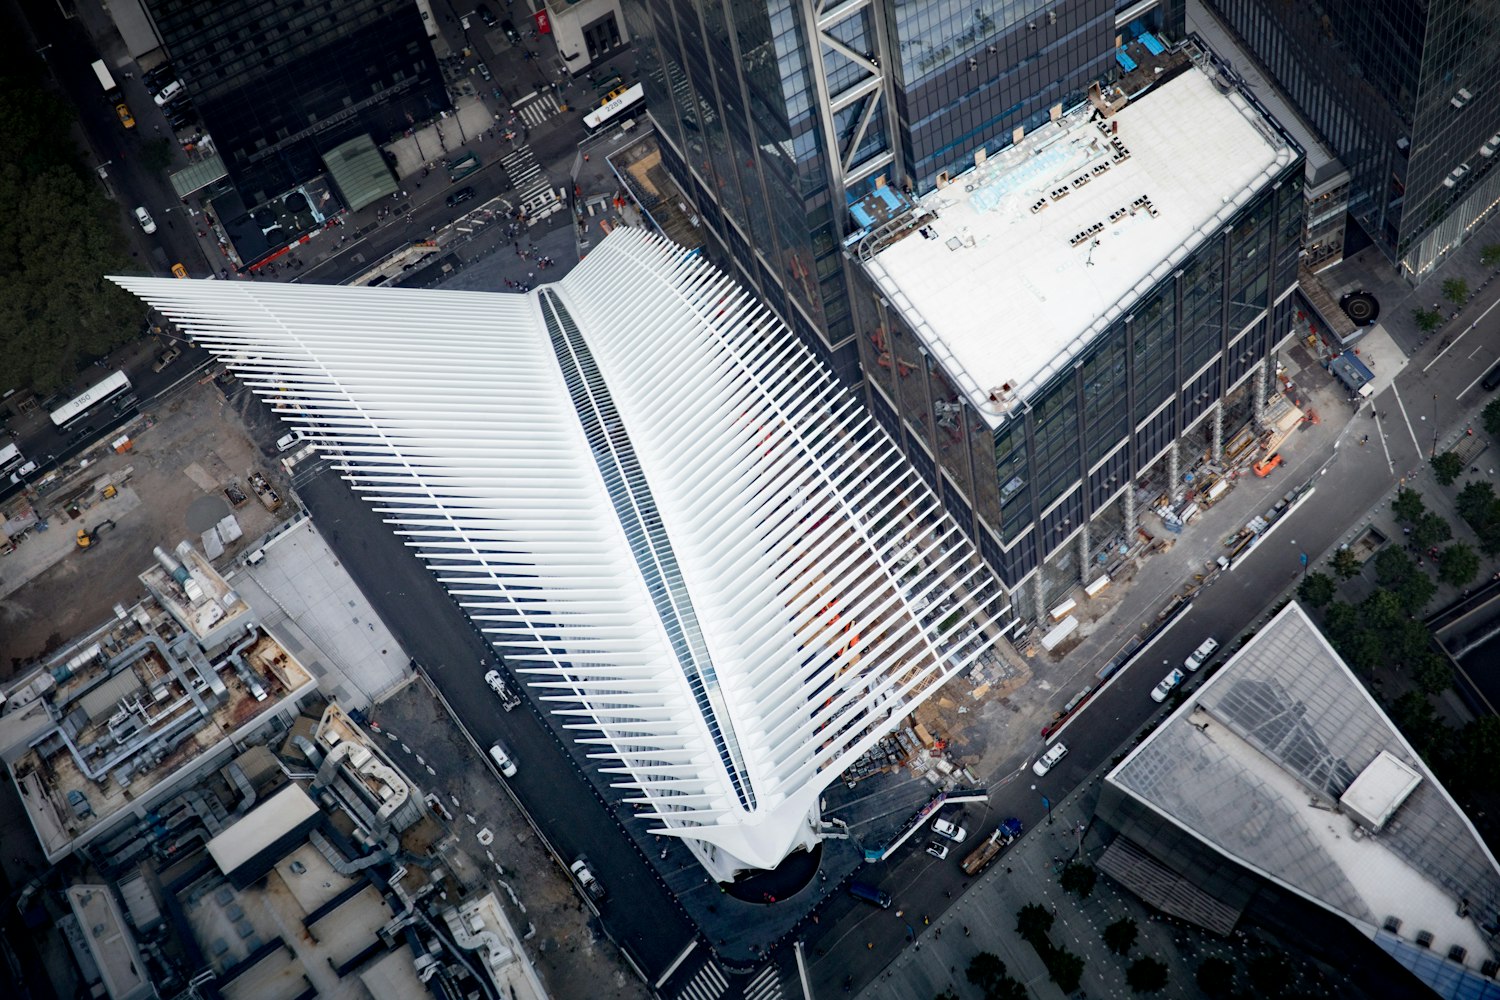 How to Visit the Oculus at the World Trade Center in NYC – 911 Ground Zero